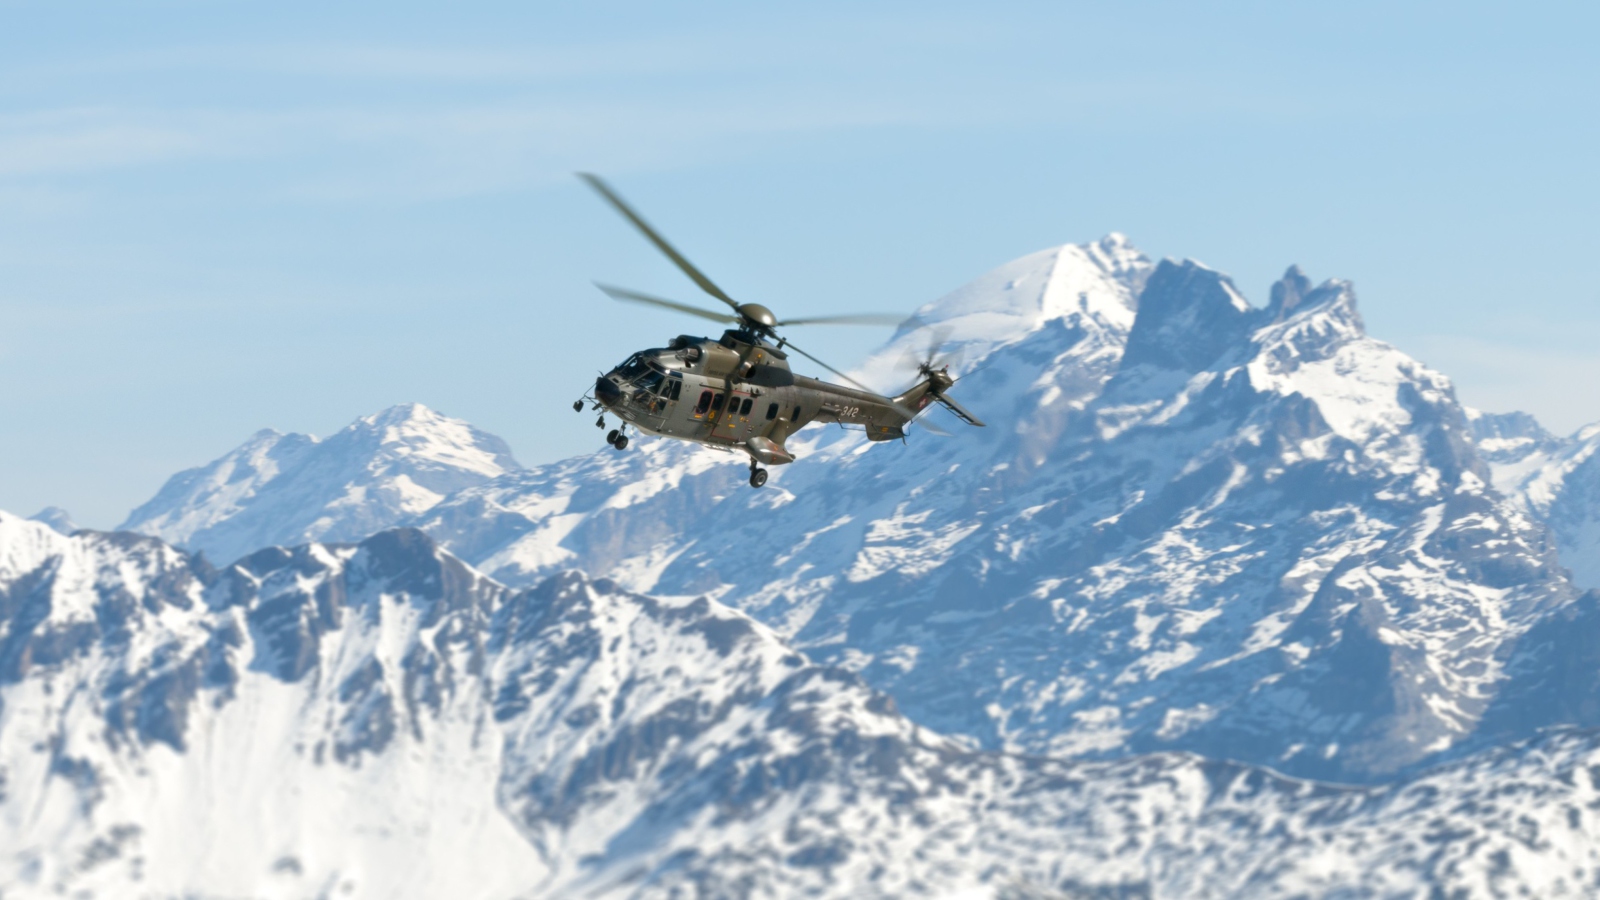 Helicopter Over Snowy Mountains wallpaper 1600x900